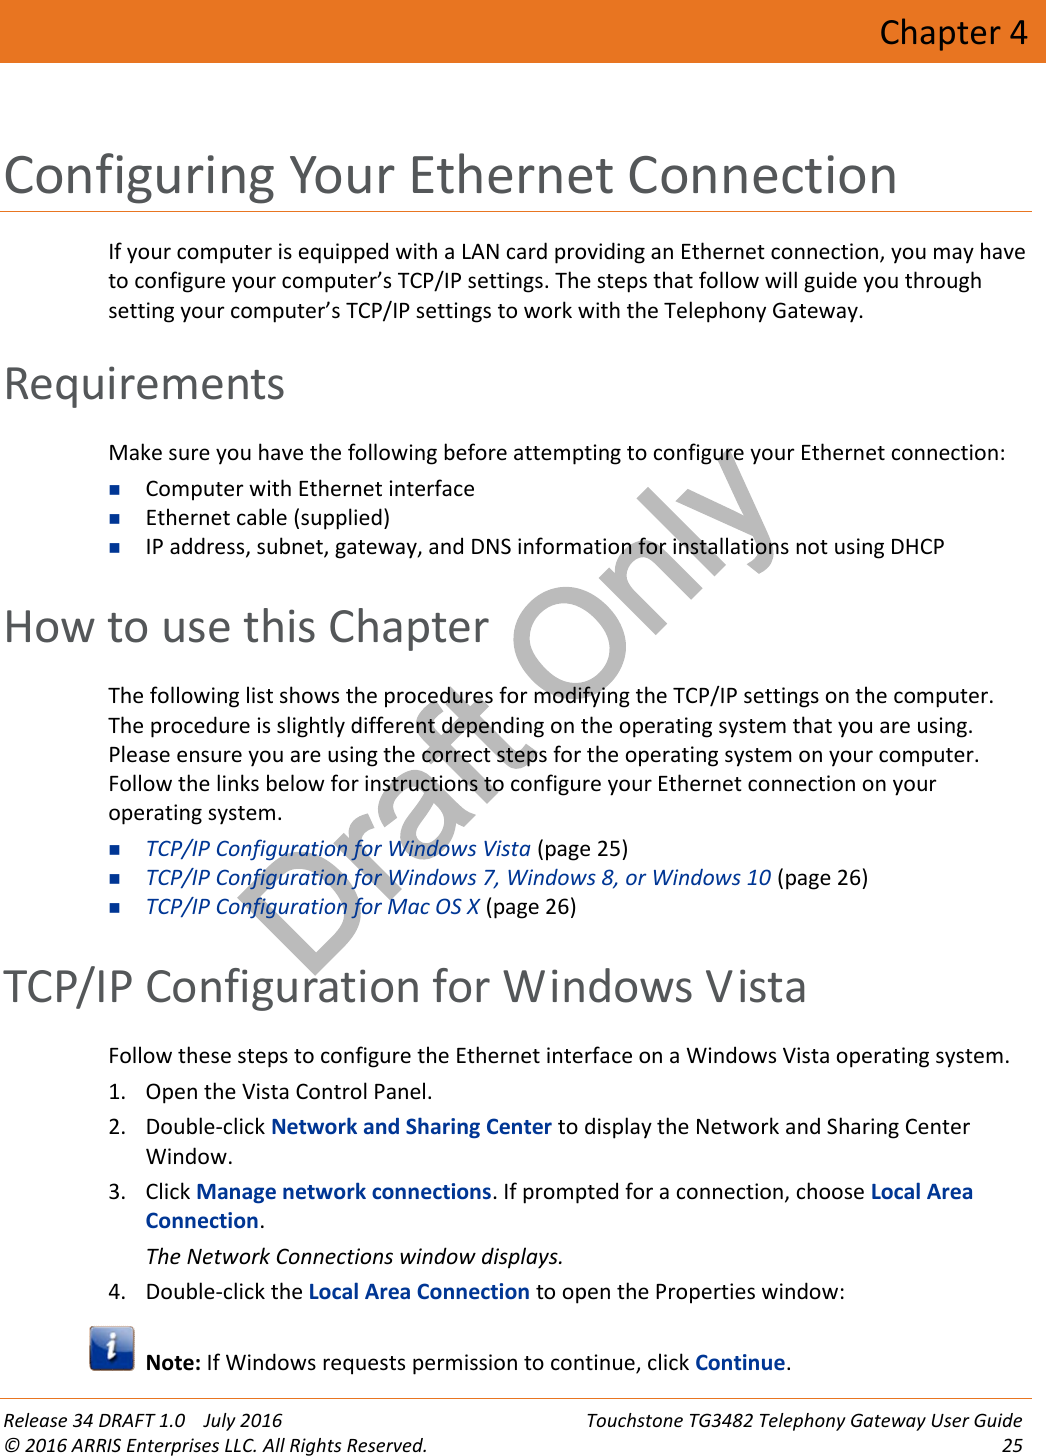 Draft OnlyRelease 34 DRAFT 1.0 July 2016 Touchstone TG3482 Telephony Gateway User Guide© 2016 ARRIS Enterprises LLC. All Rights Reserved. 25Chapter 4Configuring Your Ethernet ConnectionIf your computer is equipped with a LAN card providing an Ethernet connection, you may haveto configure your computer’s TCP/IP settings. The steps that follow will guide you throughsetting your computer’s TCP/IP settings to work with the Telephony Gateway.RequirementsMake sure you have the following before attempting to configure your Ethernet connection:Computer with Ethernet interfaceEthernet cable (supplied)IP address, subnet, gateway, and DNS information for installations not using DHCPHow to use this ChapterThe following list shows the procedures for modifying the TCP/IP settings on the computer.The procedure is slightly different depending on the operating system that you are using.Please ensure you are using the correct steps for the operating system on your computer.Follow the links below for instructions to configure your Ethernet connection on youroperating system.TCP/IP Configuration for Windows Vista (page 25)TCP/IP Configuration for Windows 7, Windows 8, or Windows 10 (page 26)TCP/IP Configuration for Mac OS X (page 26)TCP/IP Configuration for Windows VistaFollow these steps to configure the Ethernet interface on a Windows Vista operating system.1. Open the Vista Control Panel.2. Double-click Network and Sharing Center to display the Network and Sharing CenterWindow.3. Click Manage network connections. If prompted for a connection, choose Local AreaConnection.The Network Connections window displays.4. Double-click the Local Area Connection to open the Properties window:Note: If Windows requests permission to continue, click Continue.